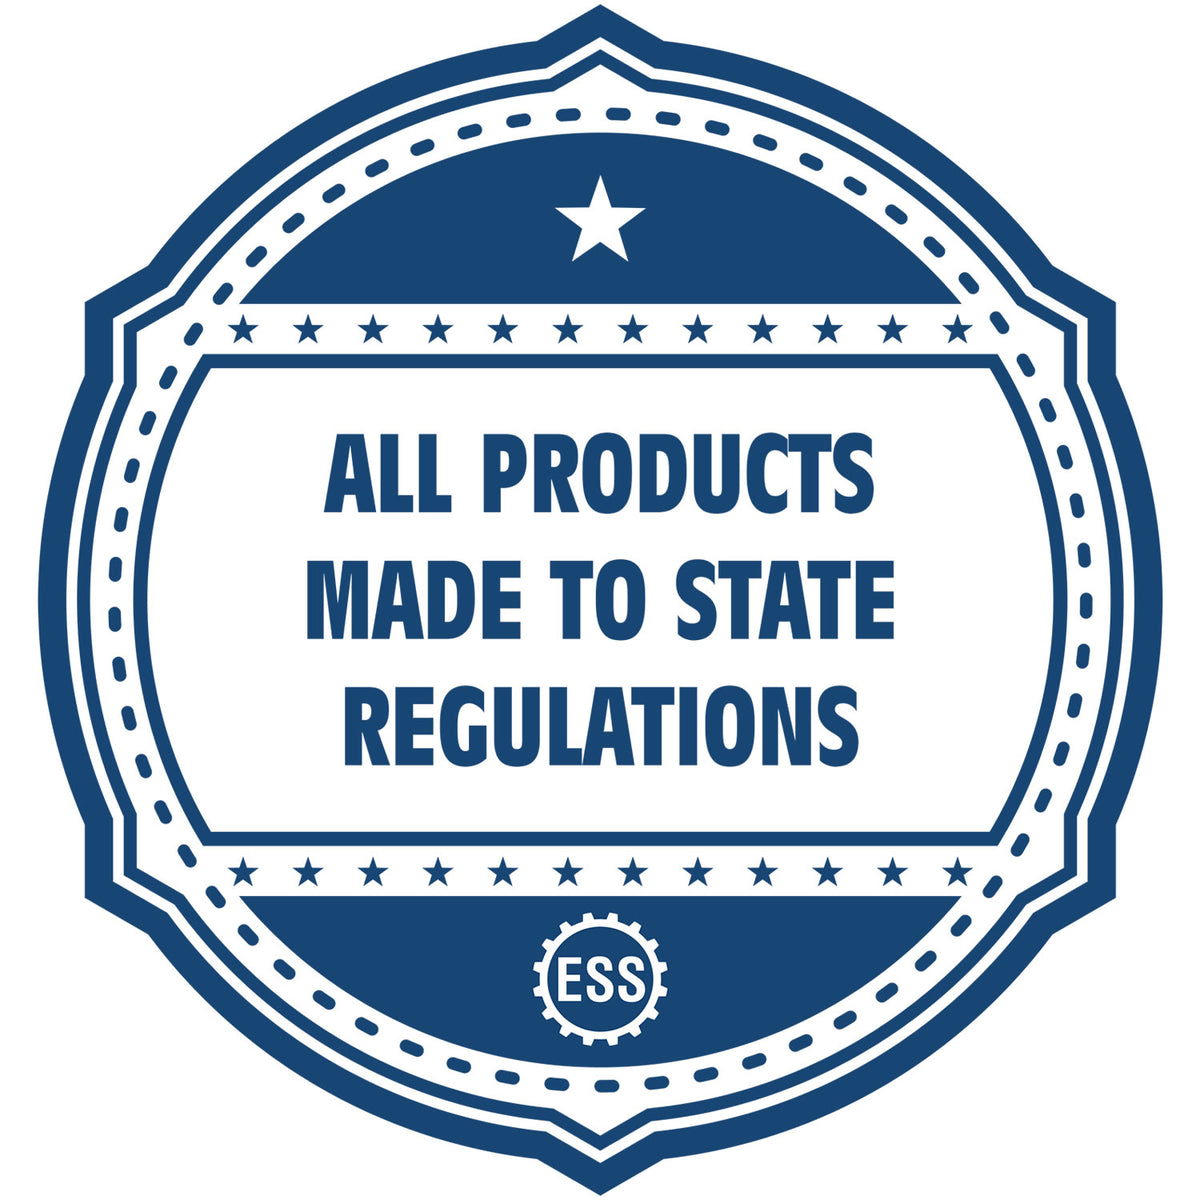 A blue icon or badge for the Gift Maine Engineer Seal showing that this product is made in compliance with state regulations.